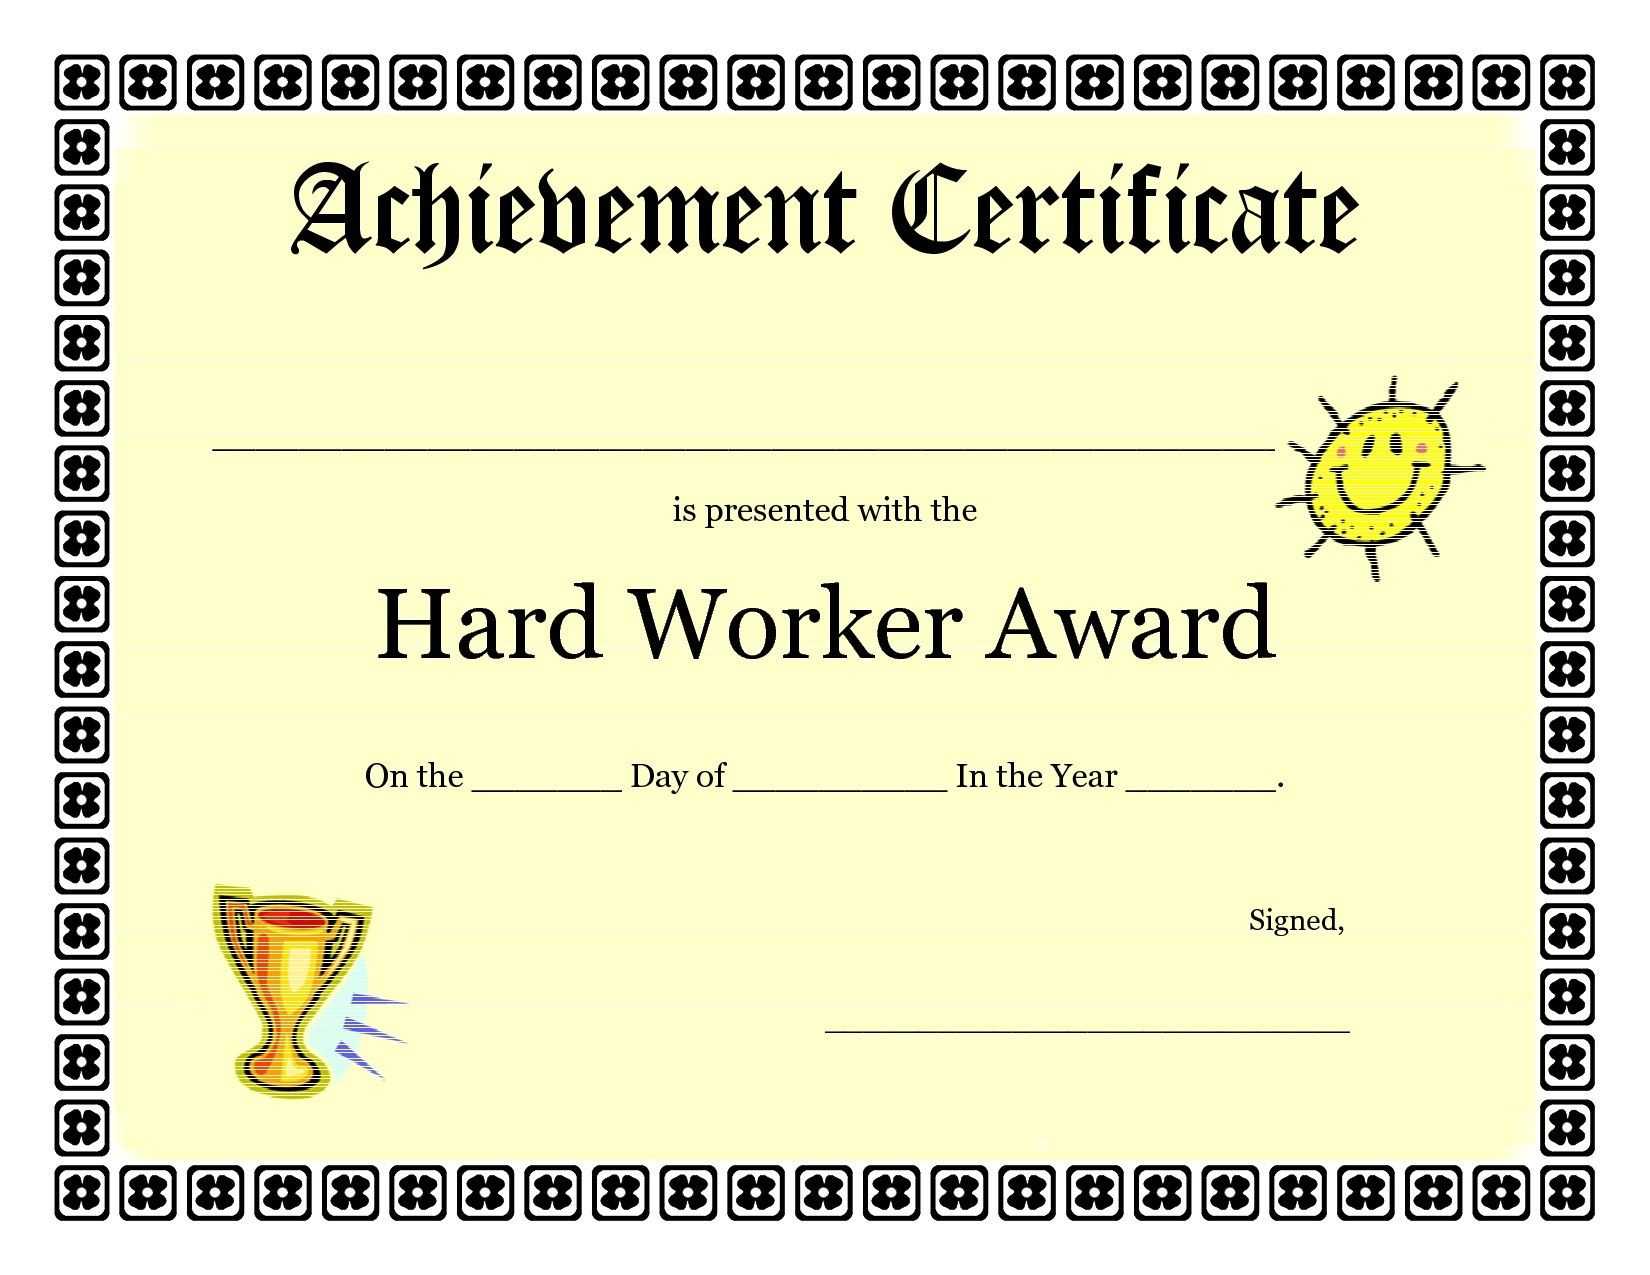 Free Vbs Certificate Templates New Printable Achievement With Vbs Certificate Template